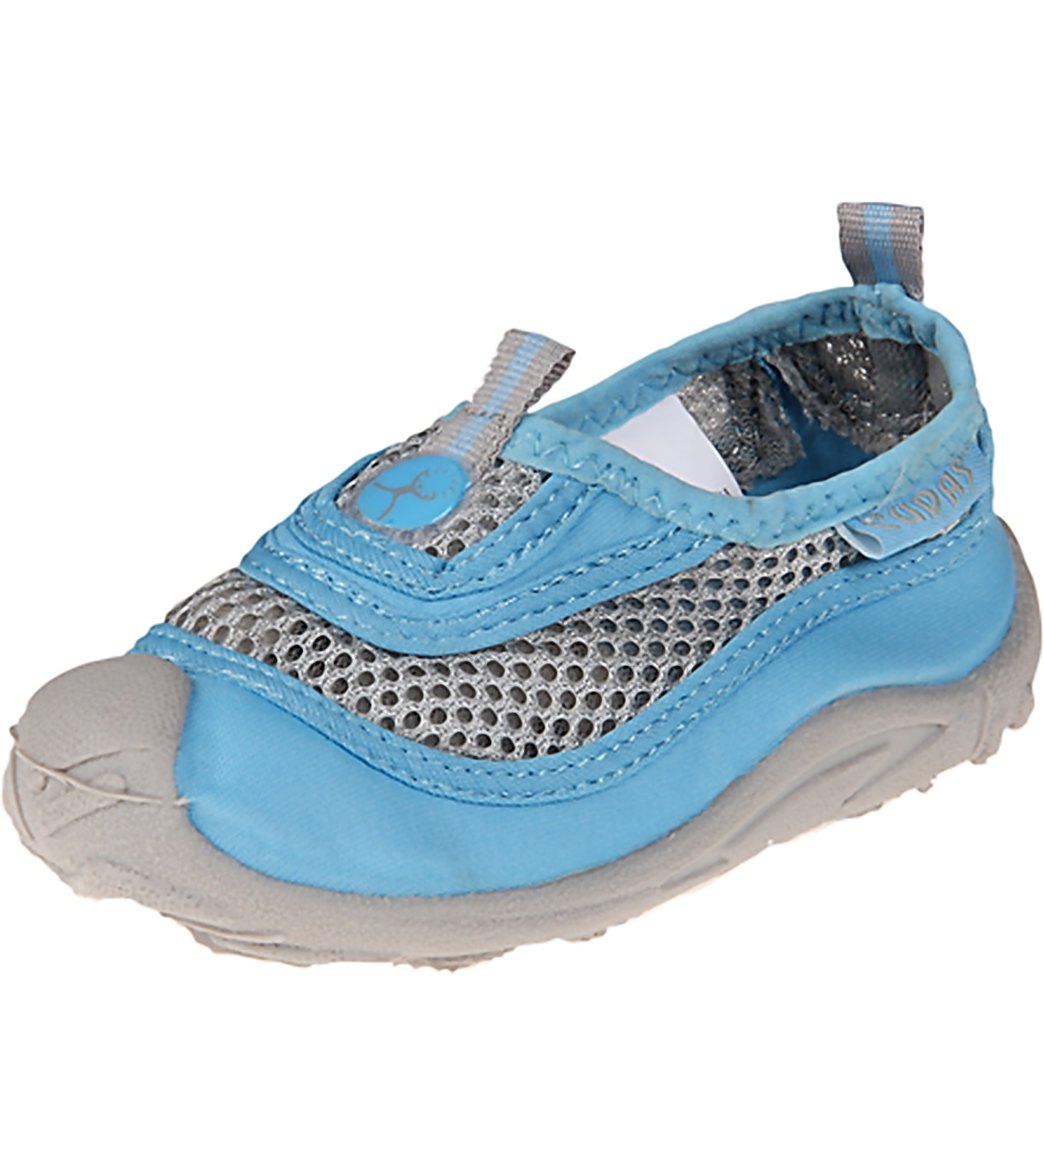 Cudas Youth Flatwater Watershoes - Light Blue 12 - Swimoutlet.com